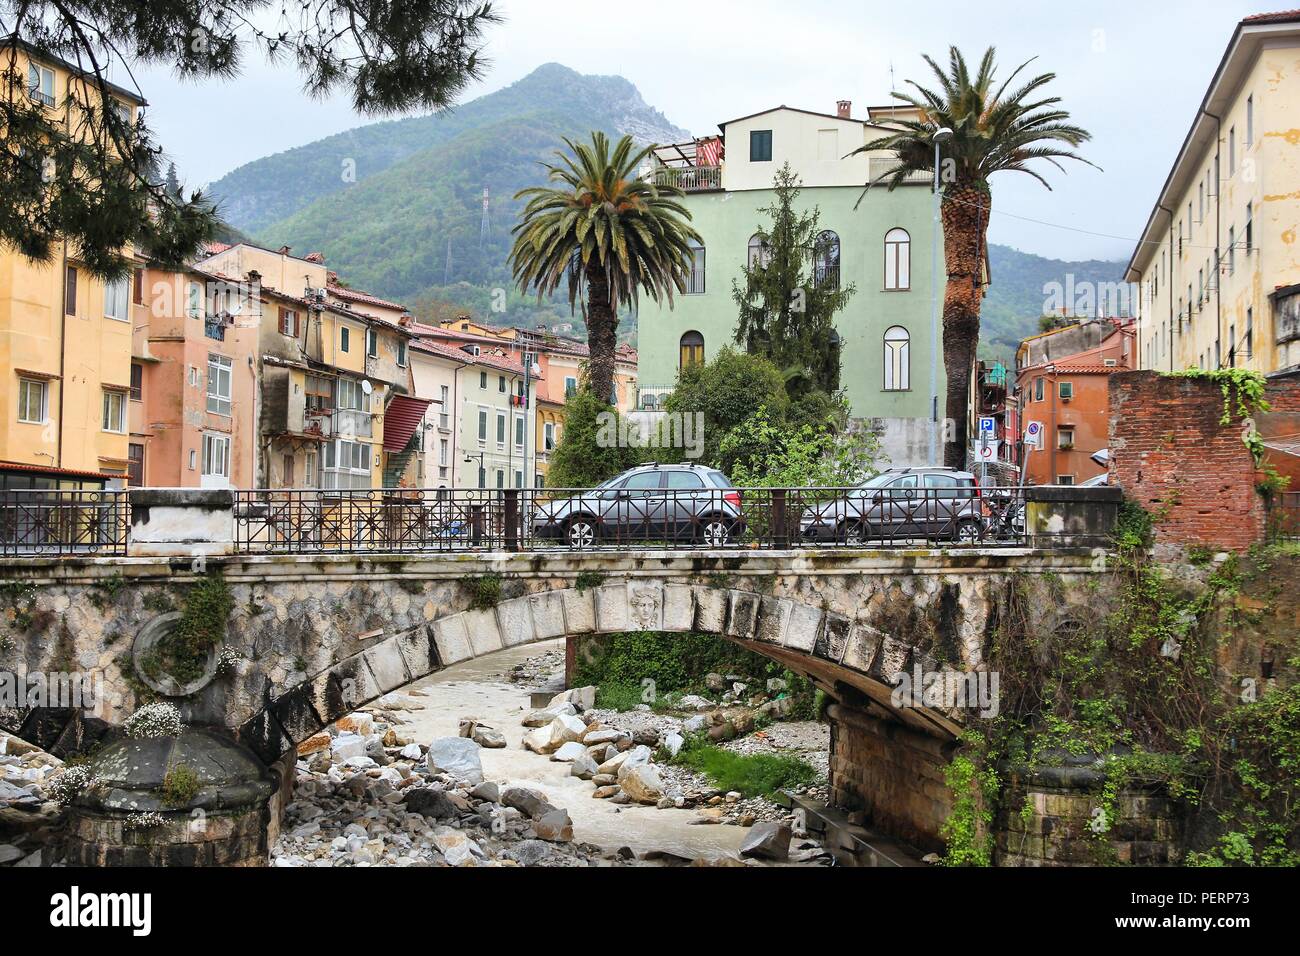 Carrara, Italy - Old Town in the region of Tuscany. River Carrione bridge. Stock Photo